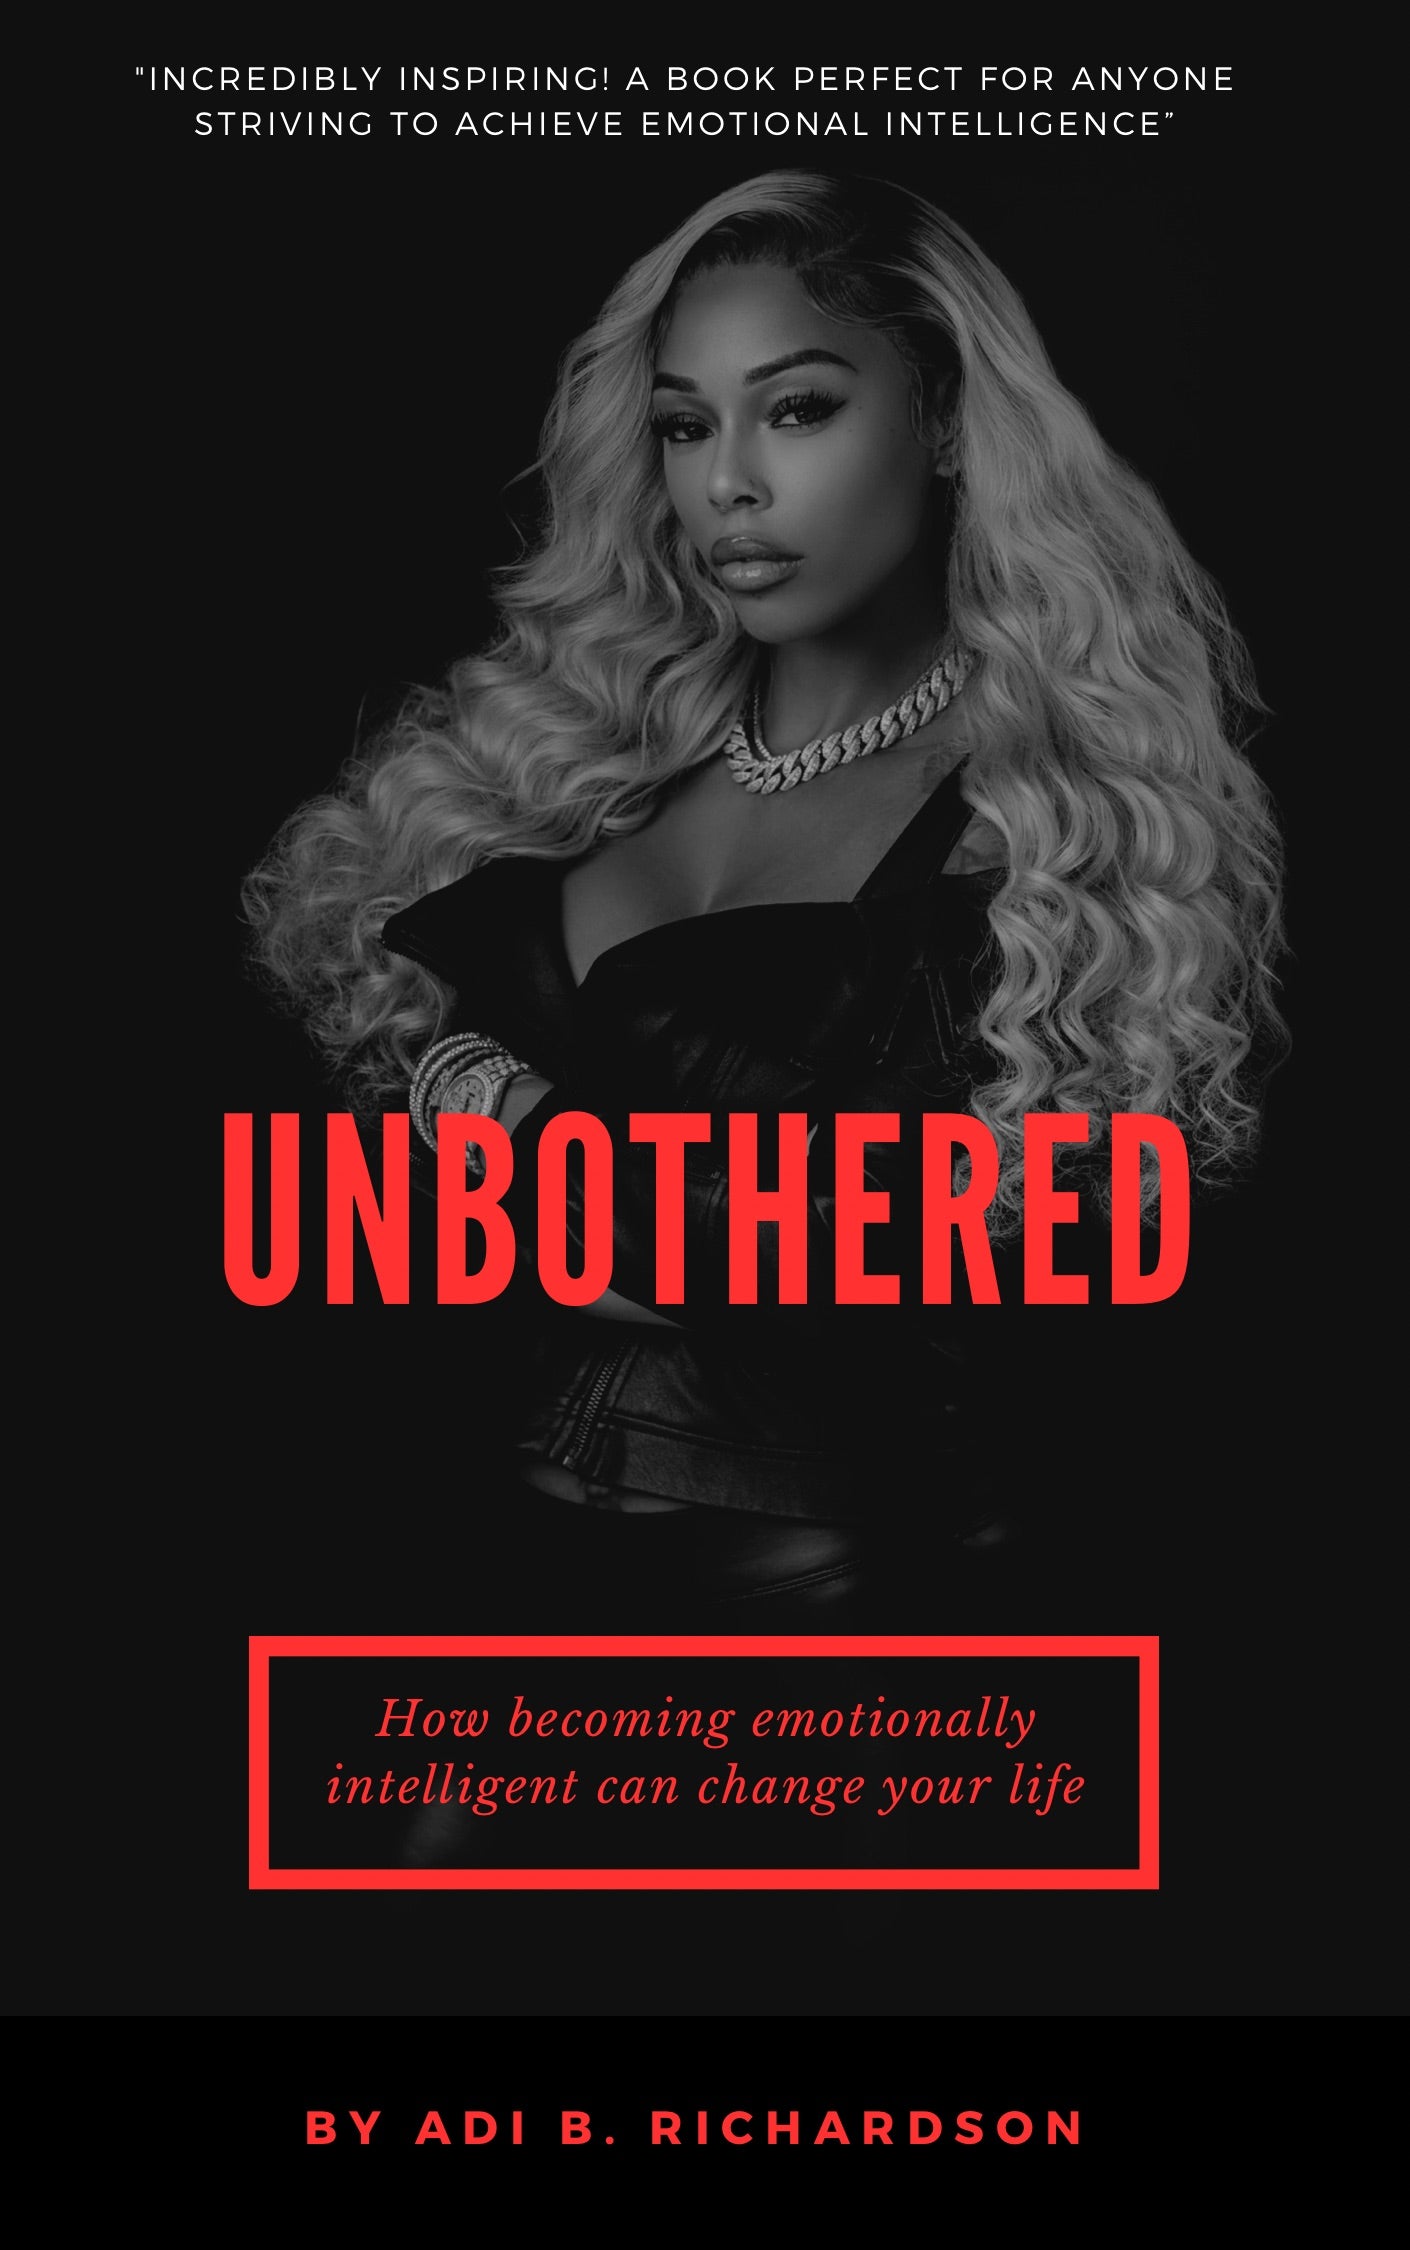 Unbothered - (BECOMING EMOTIONALLY INTELLIGENT) EBOOK